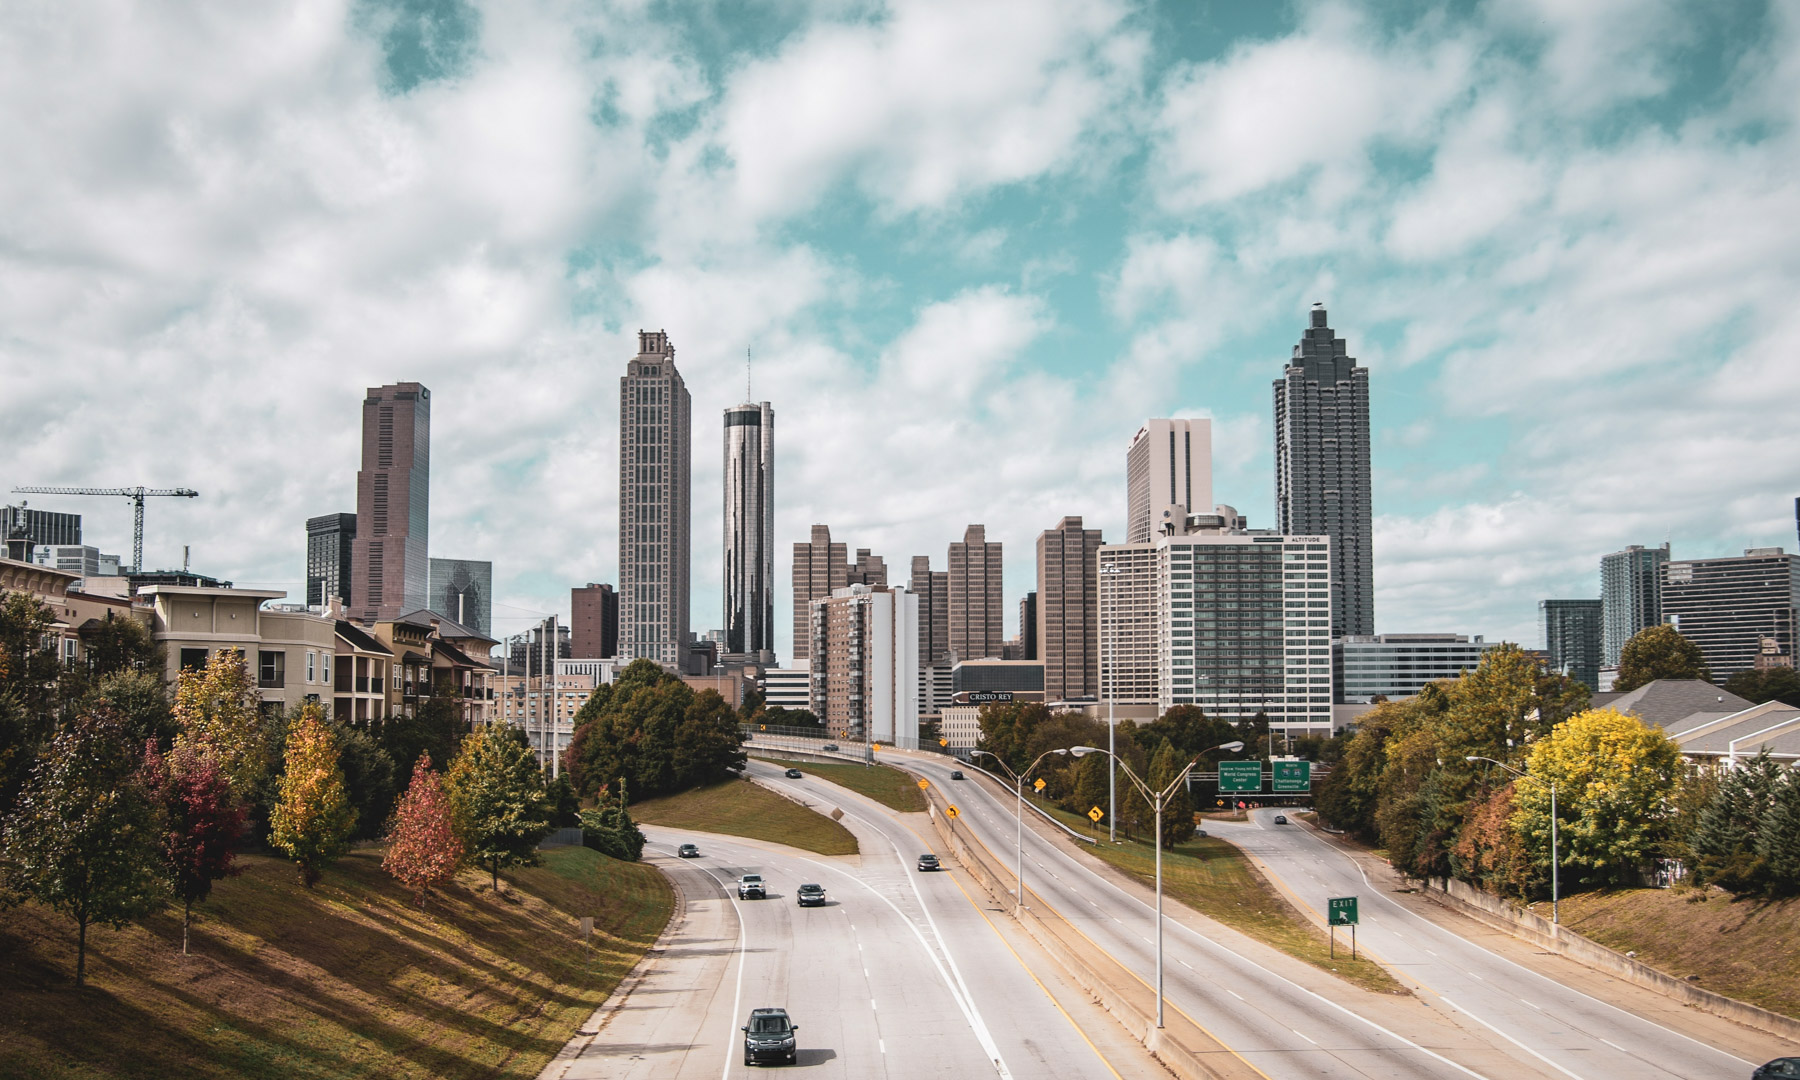 The city of Atlanta dates back to 1837, when it was founded as the gateway ...